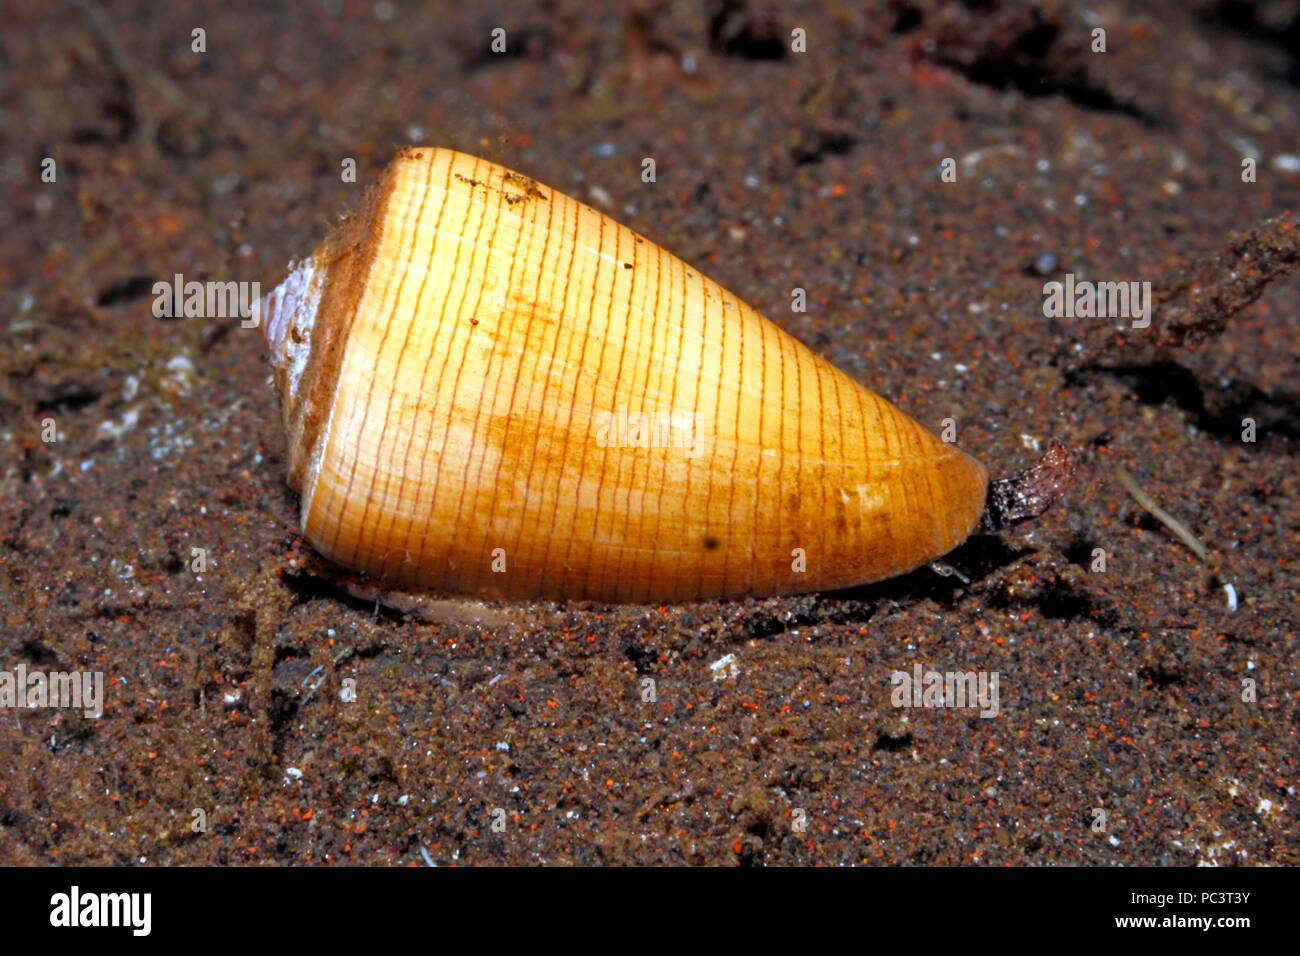 Oak Cone Shell, or Yellow Cone Shell, Conus quercinus. Alive underwater showing the syphon and eye. Tulamben, Bali, Indonesia. Bali Sea, Indian Ocean Stock Photo